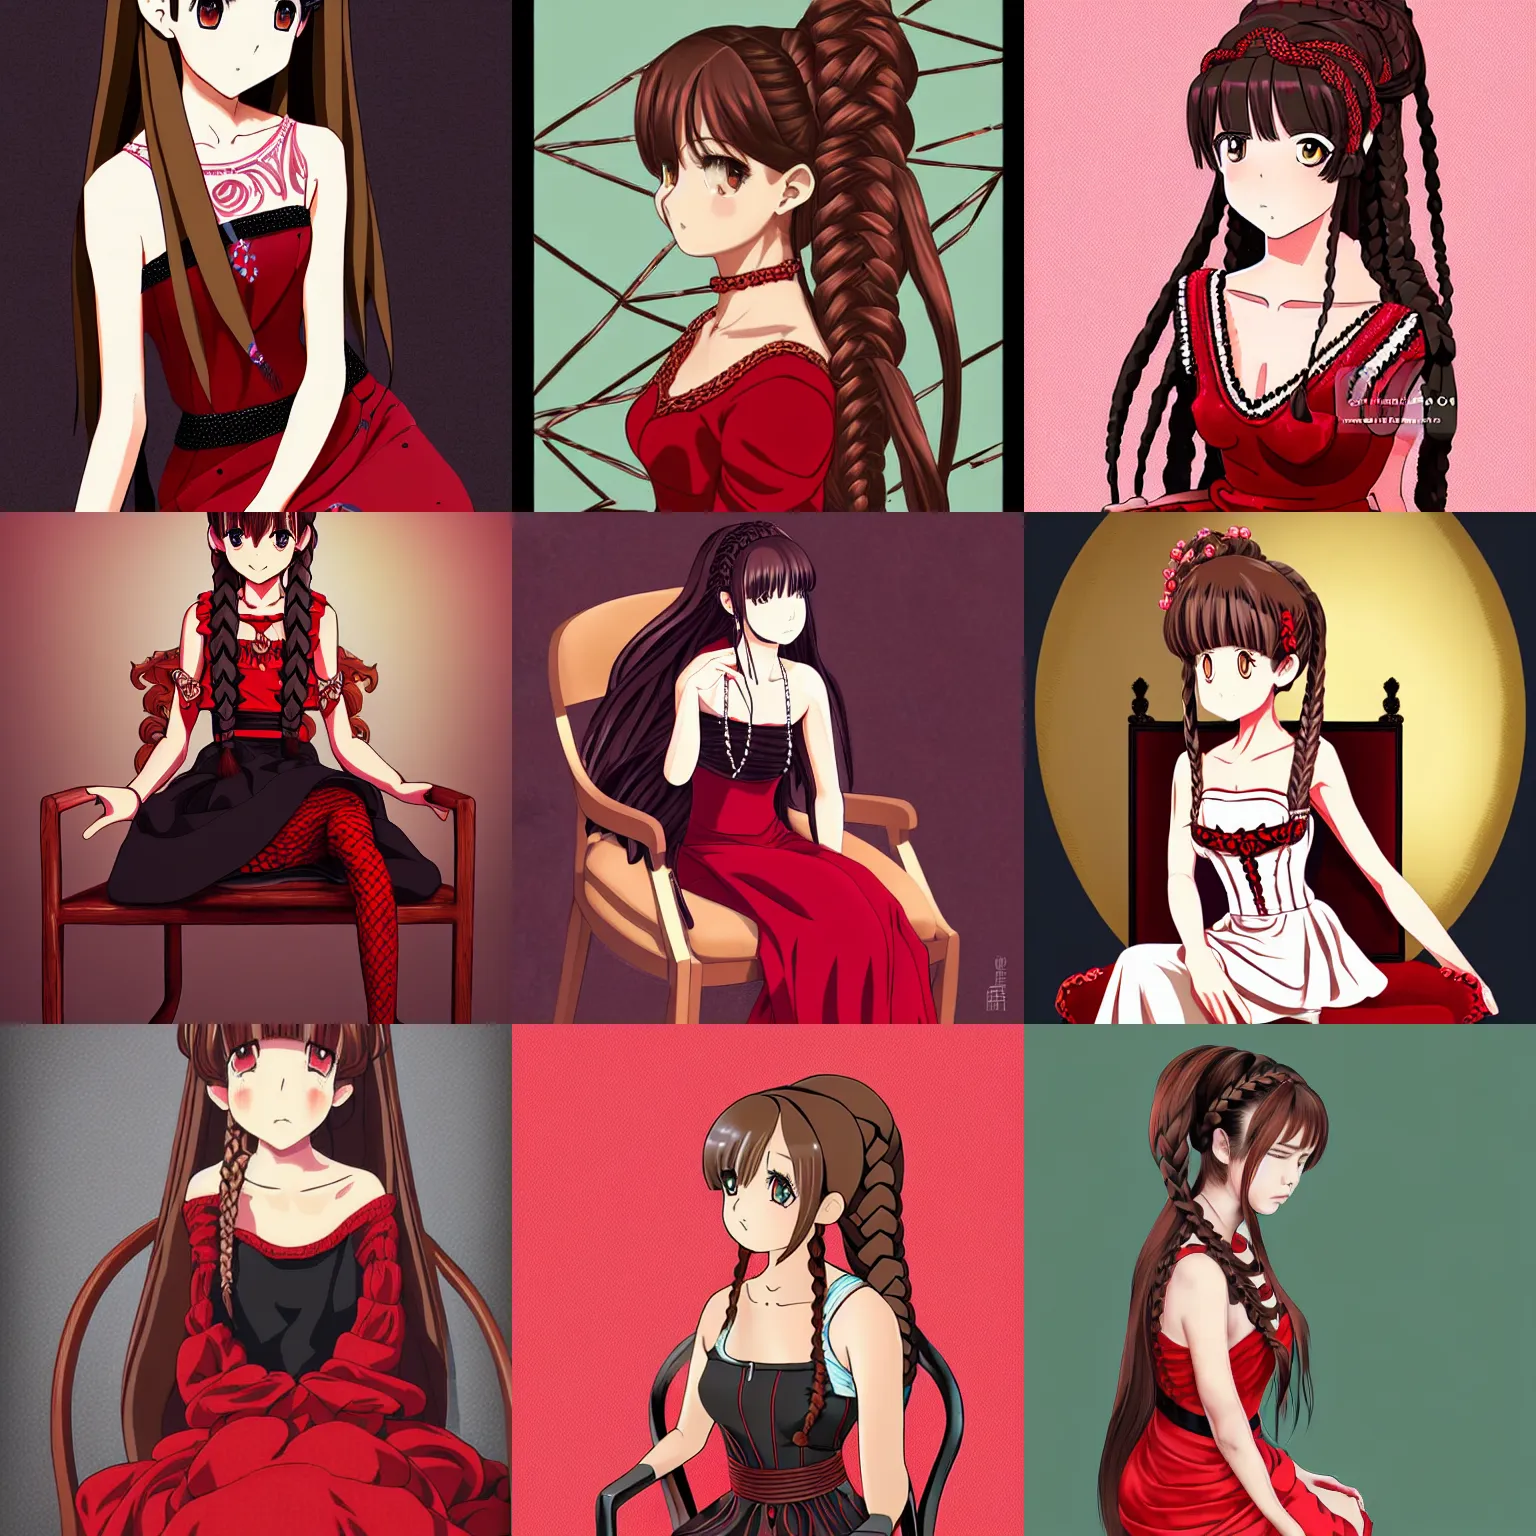 Prompt: girl with braided brown hair, wearing an elegant dress, sitting in a chair, highly detailed, painting, red and black color palette, intricate, high quality anime artstyle